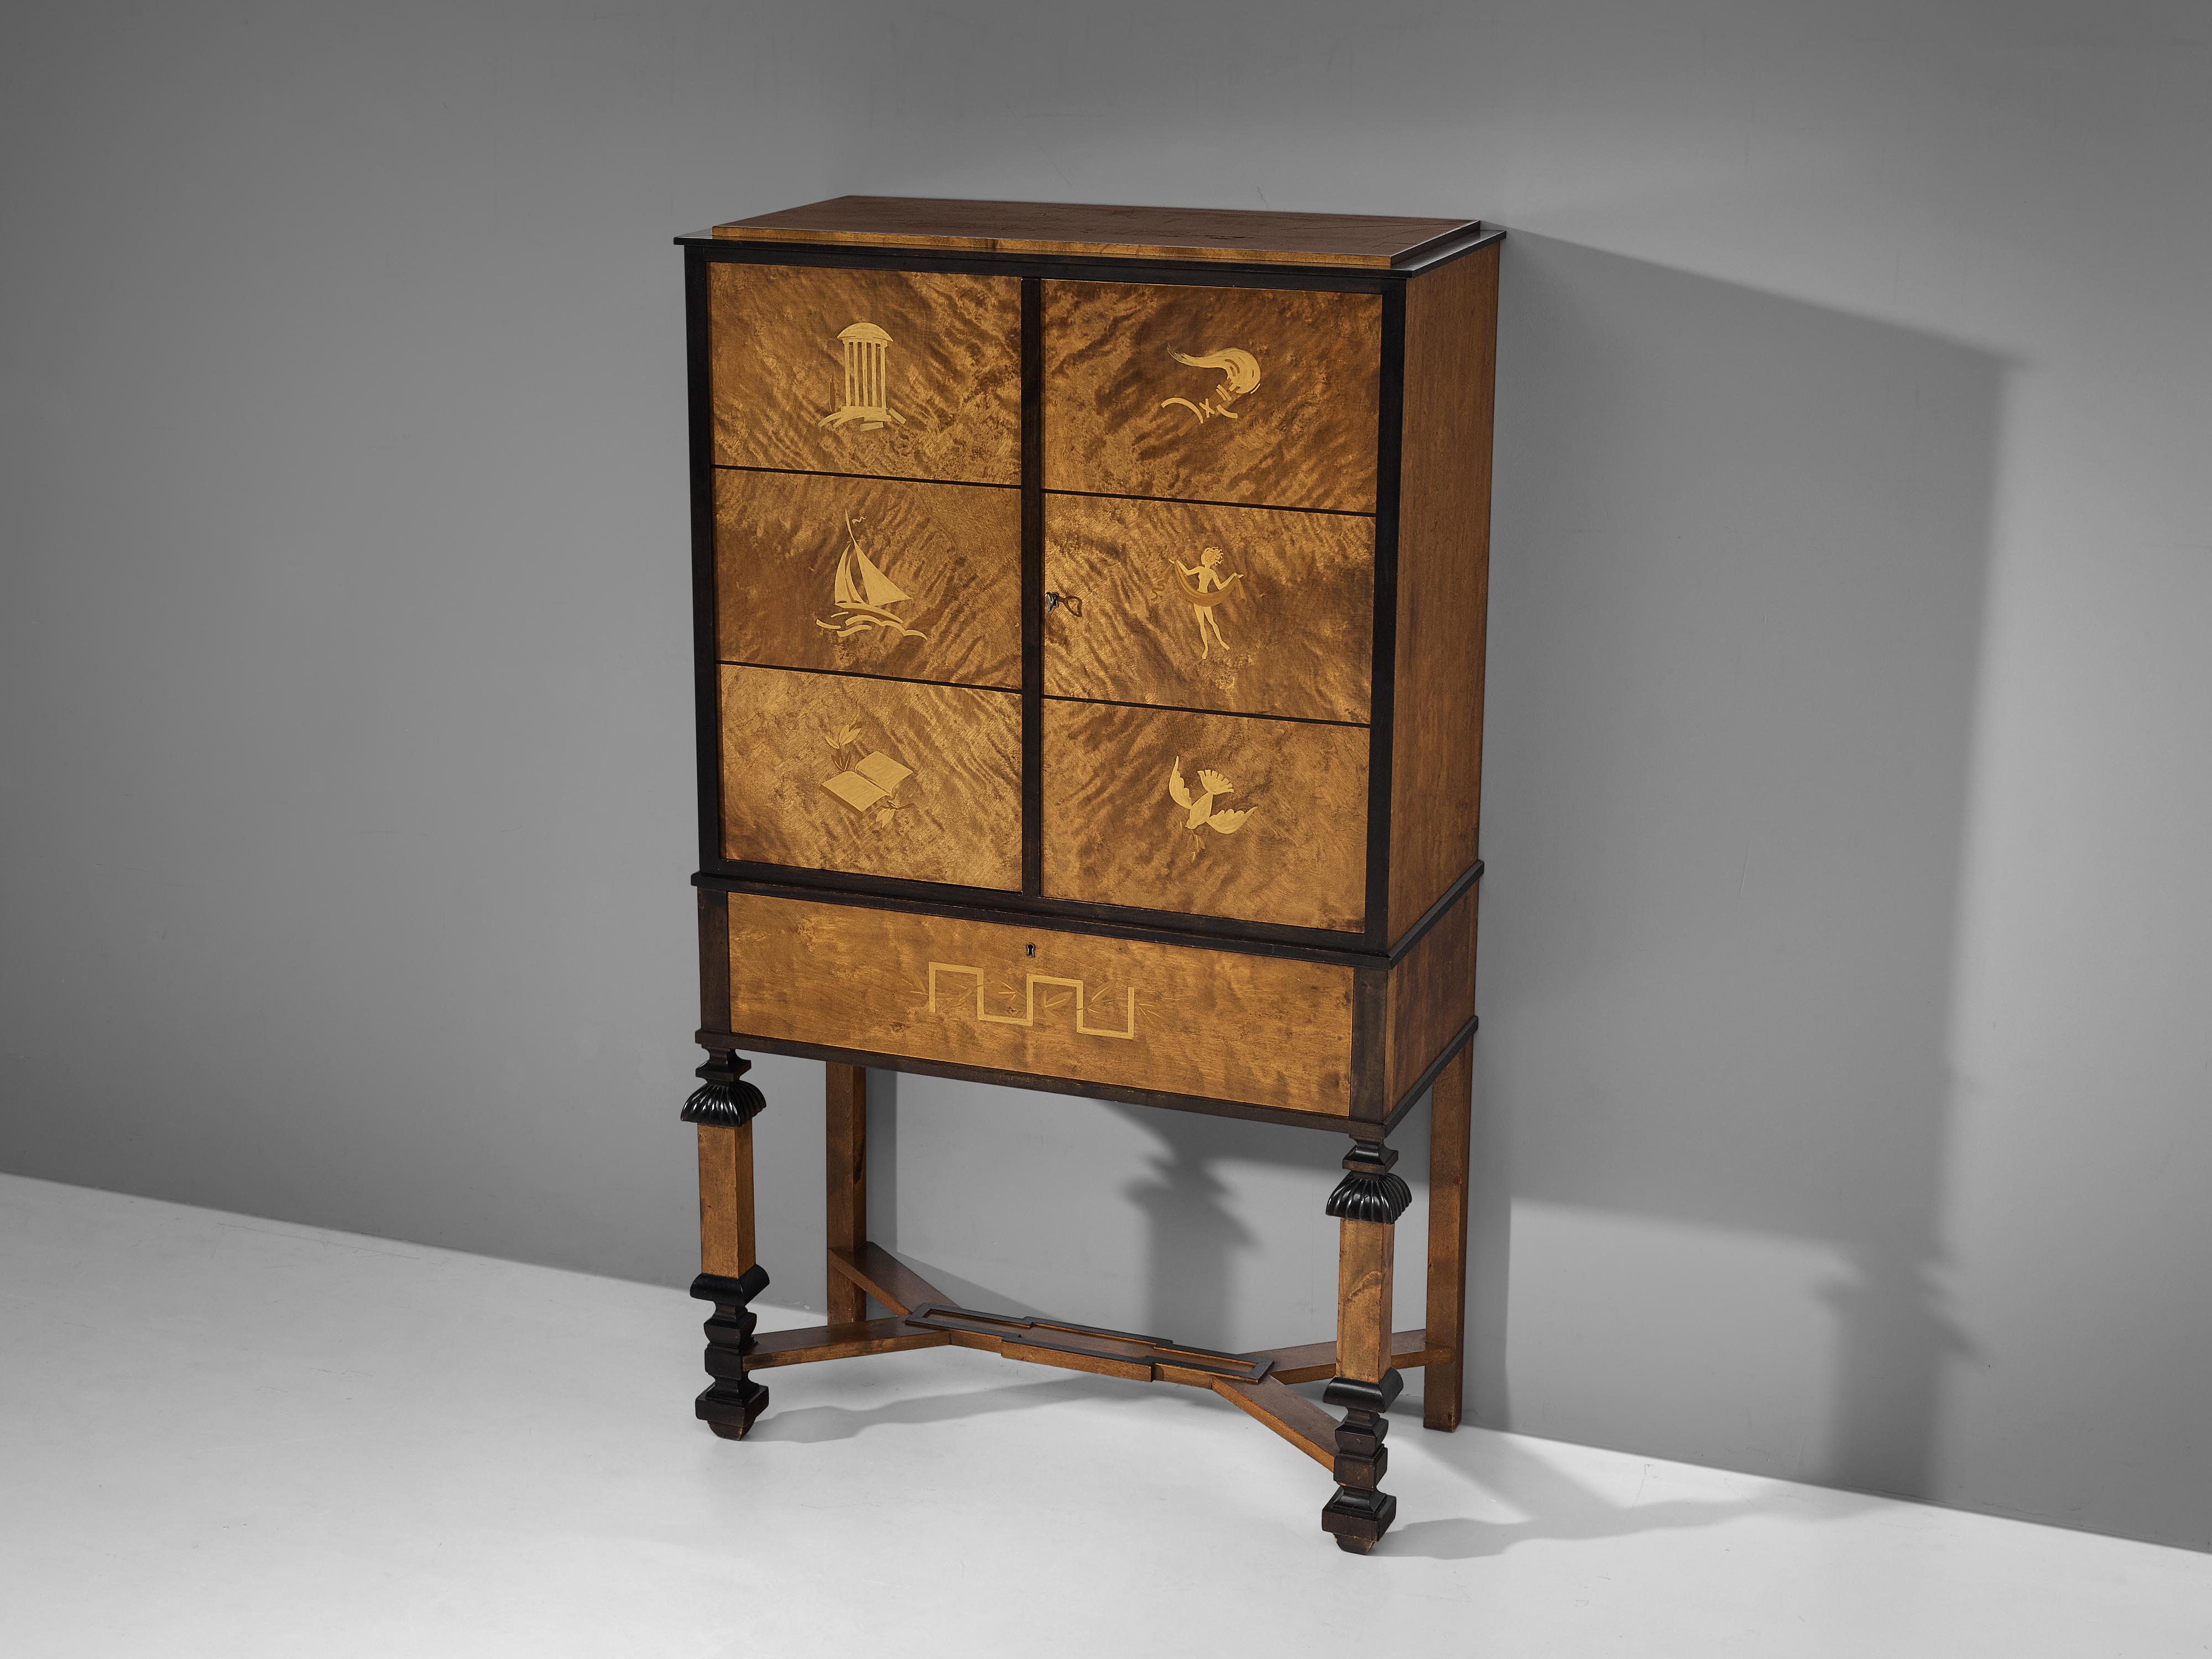 Swedish Art Deco Cabinet in Birch with Hand-Painted Motives 1